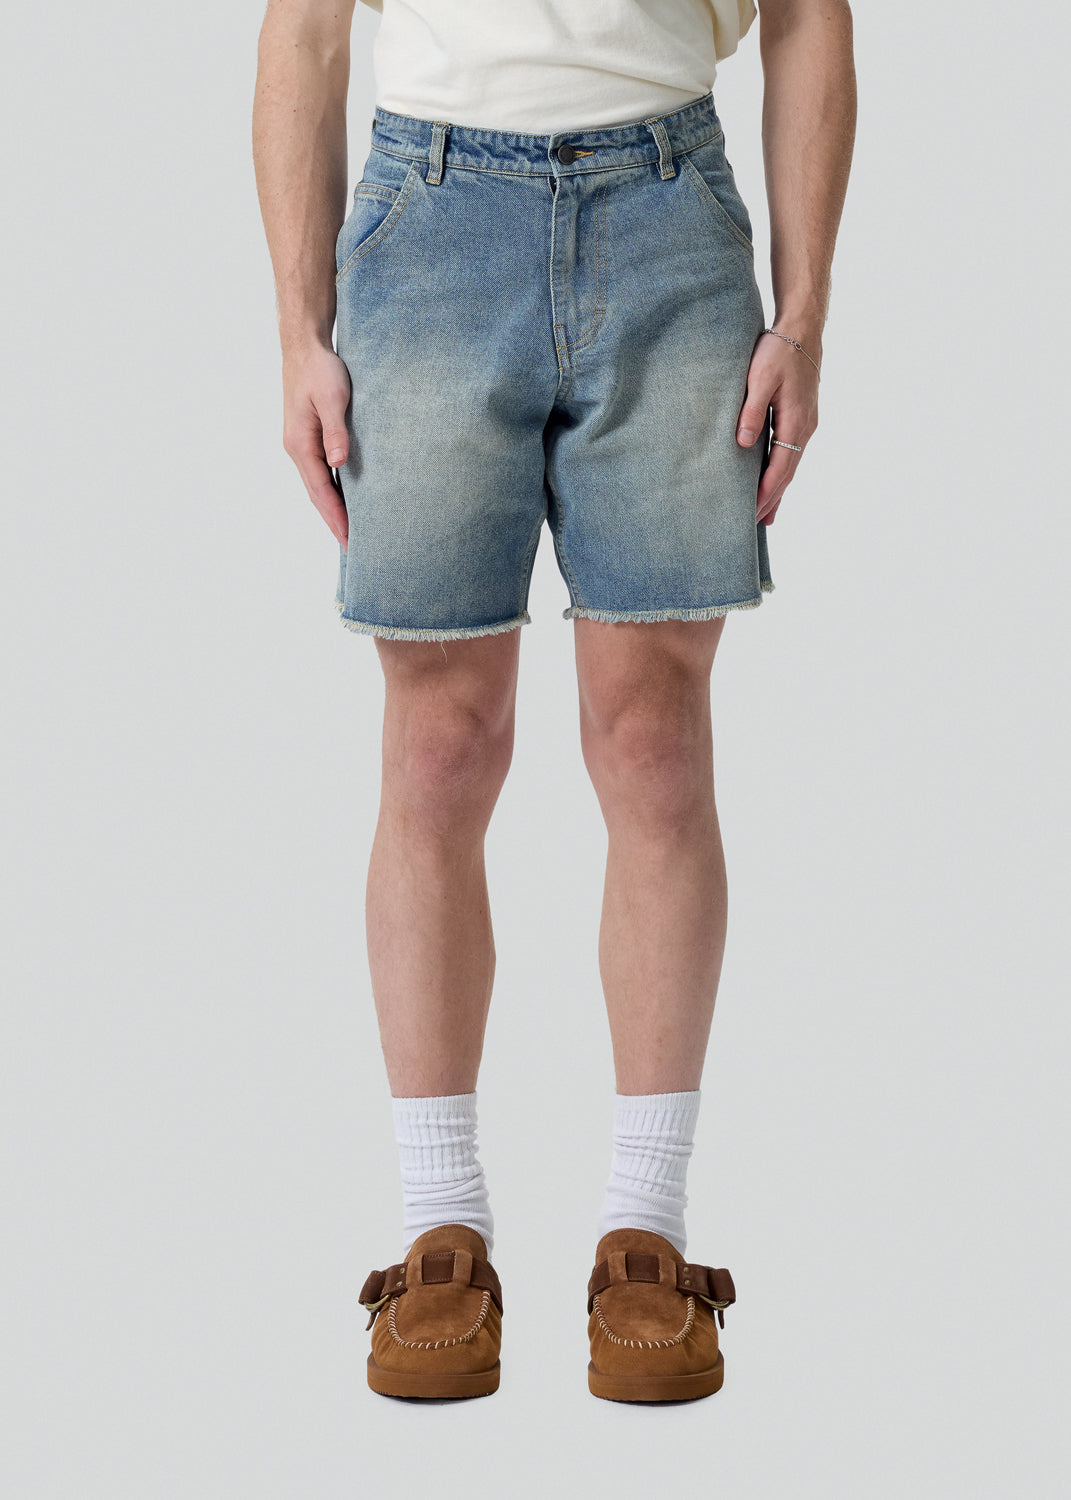 Honor the Gift - Blue Denim Shorts | 1032 SPACE